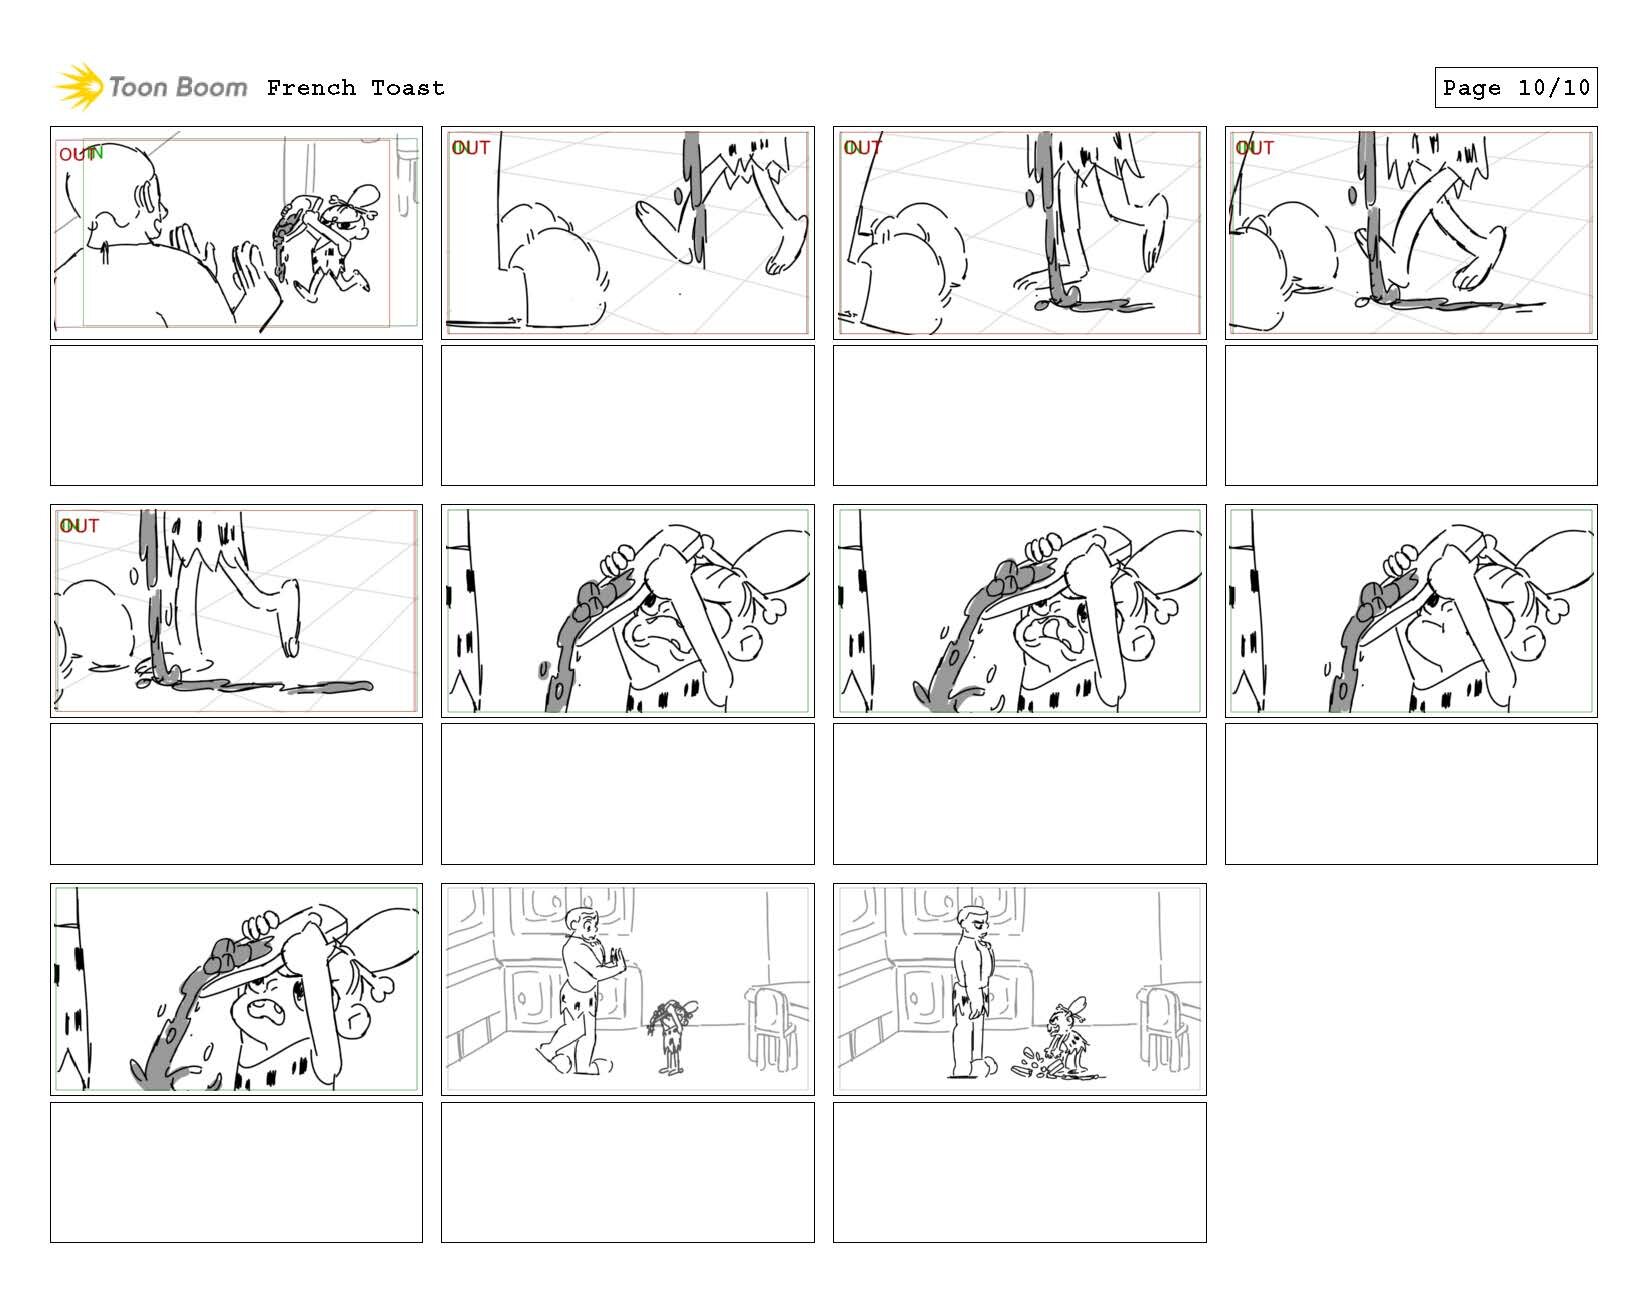 french toast mini thumbs_Page_11.jpg